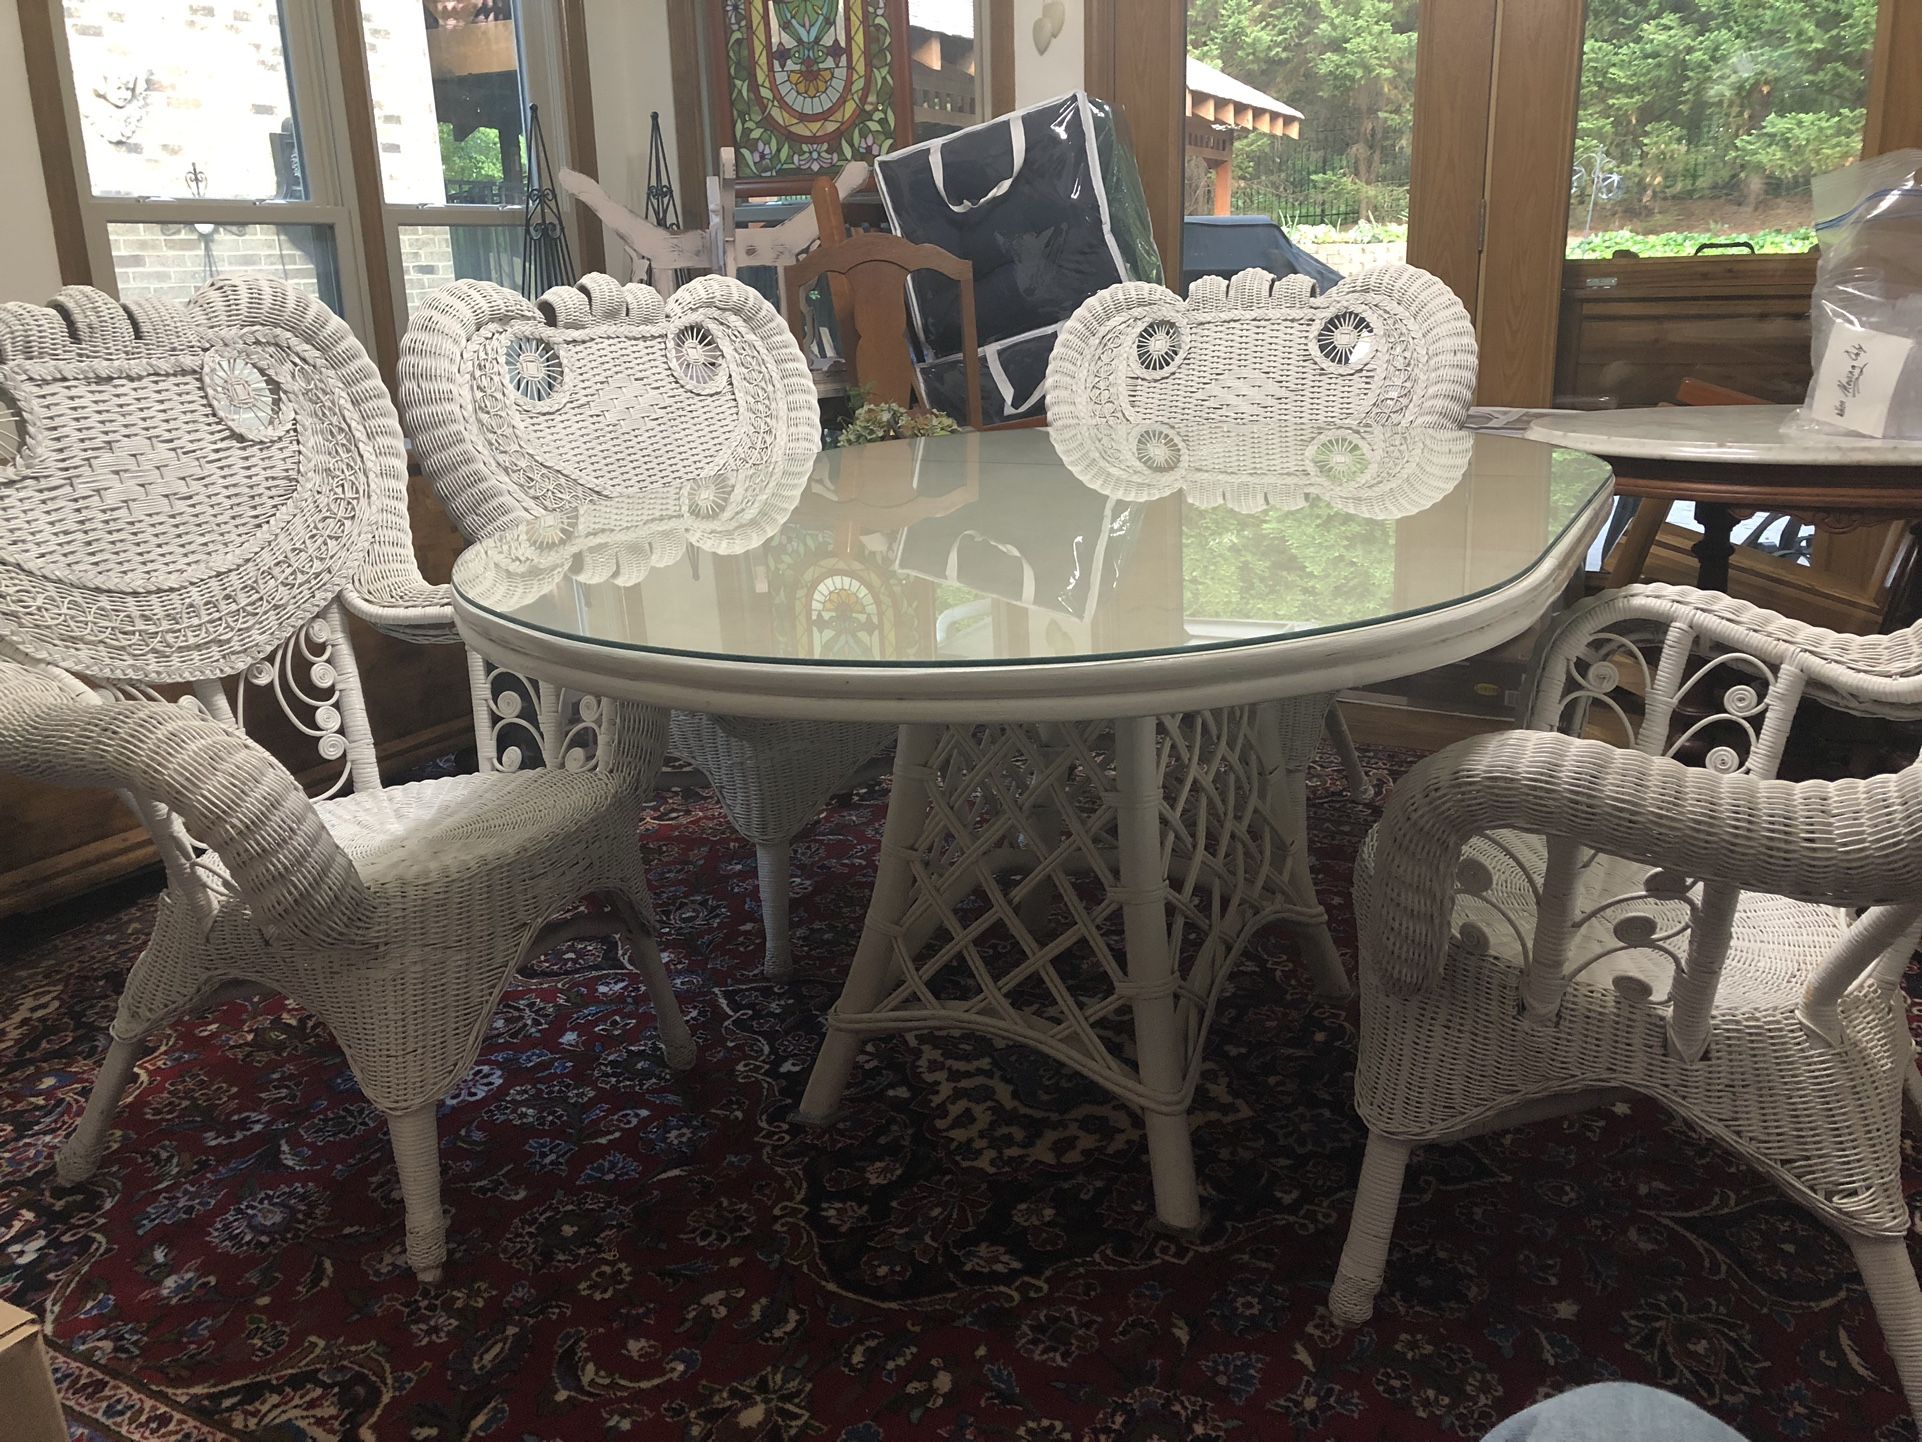 Ficks Reed Dining Table, 4 Matching Wicker Chairs, Wicker Sofa & Wicker Arm Chair